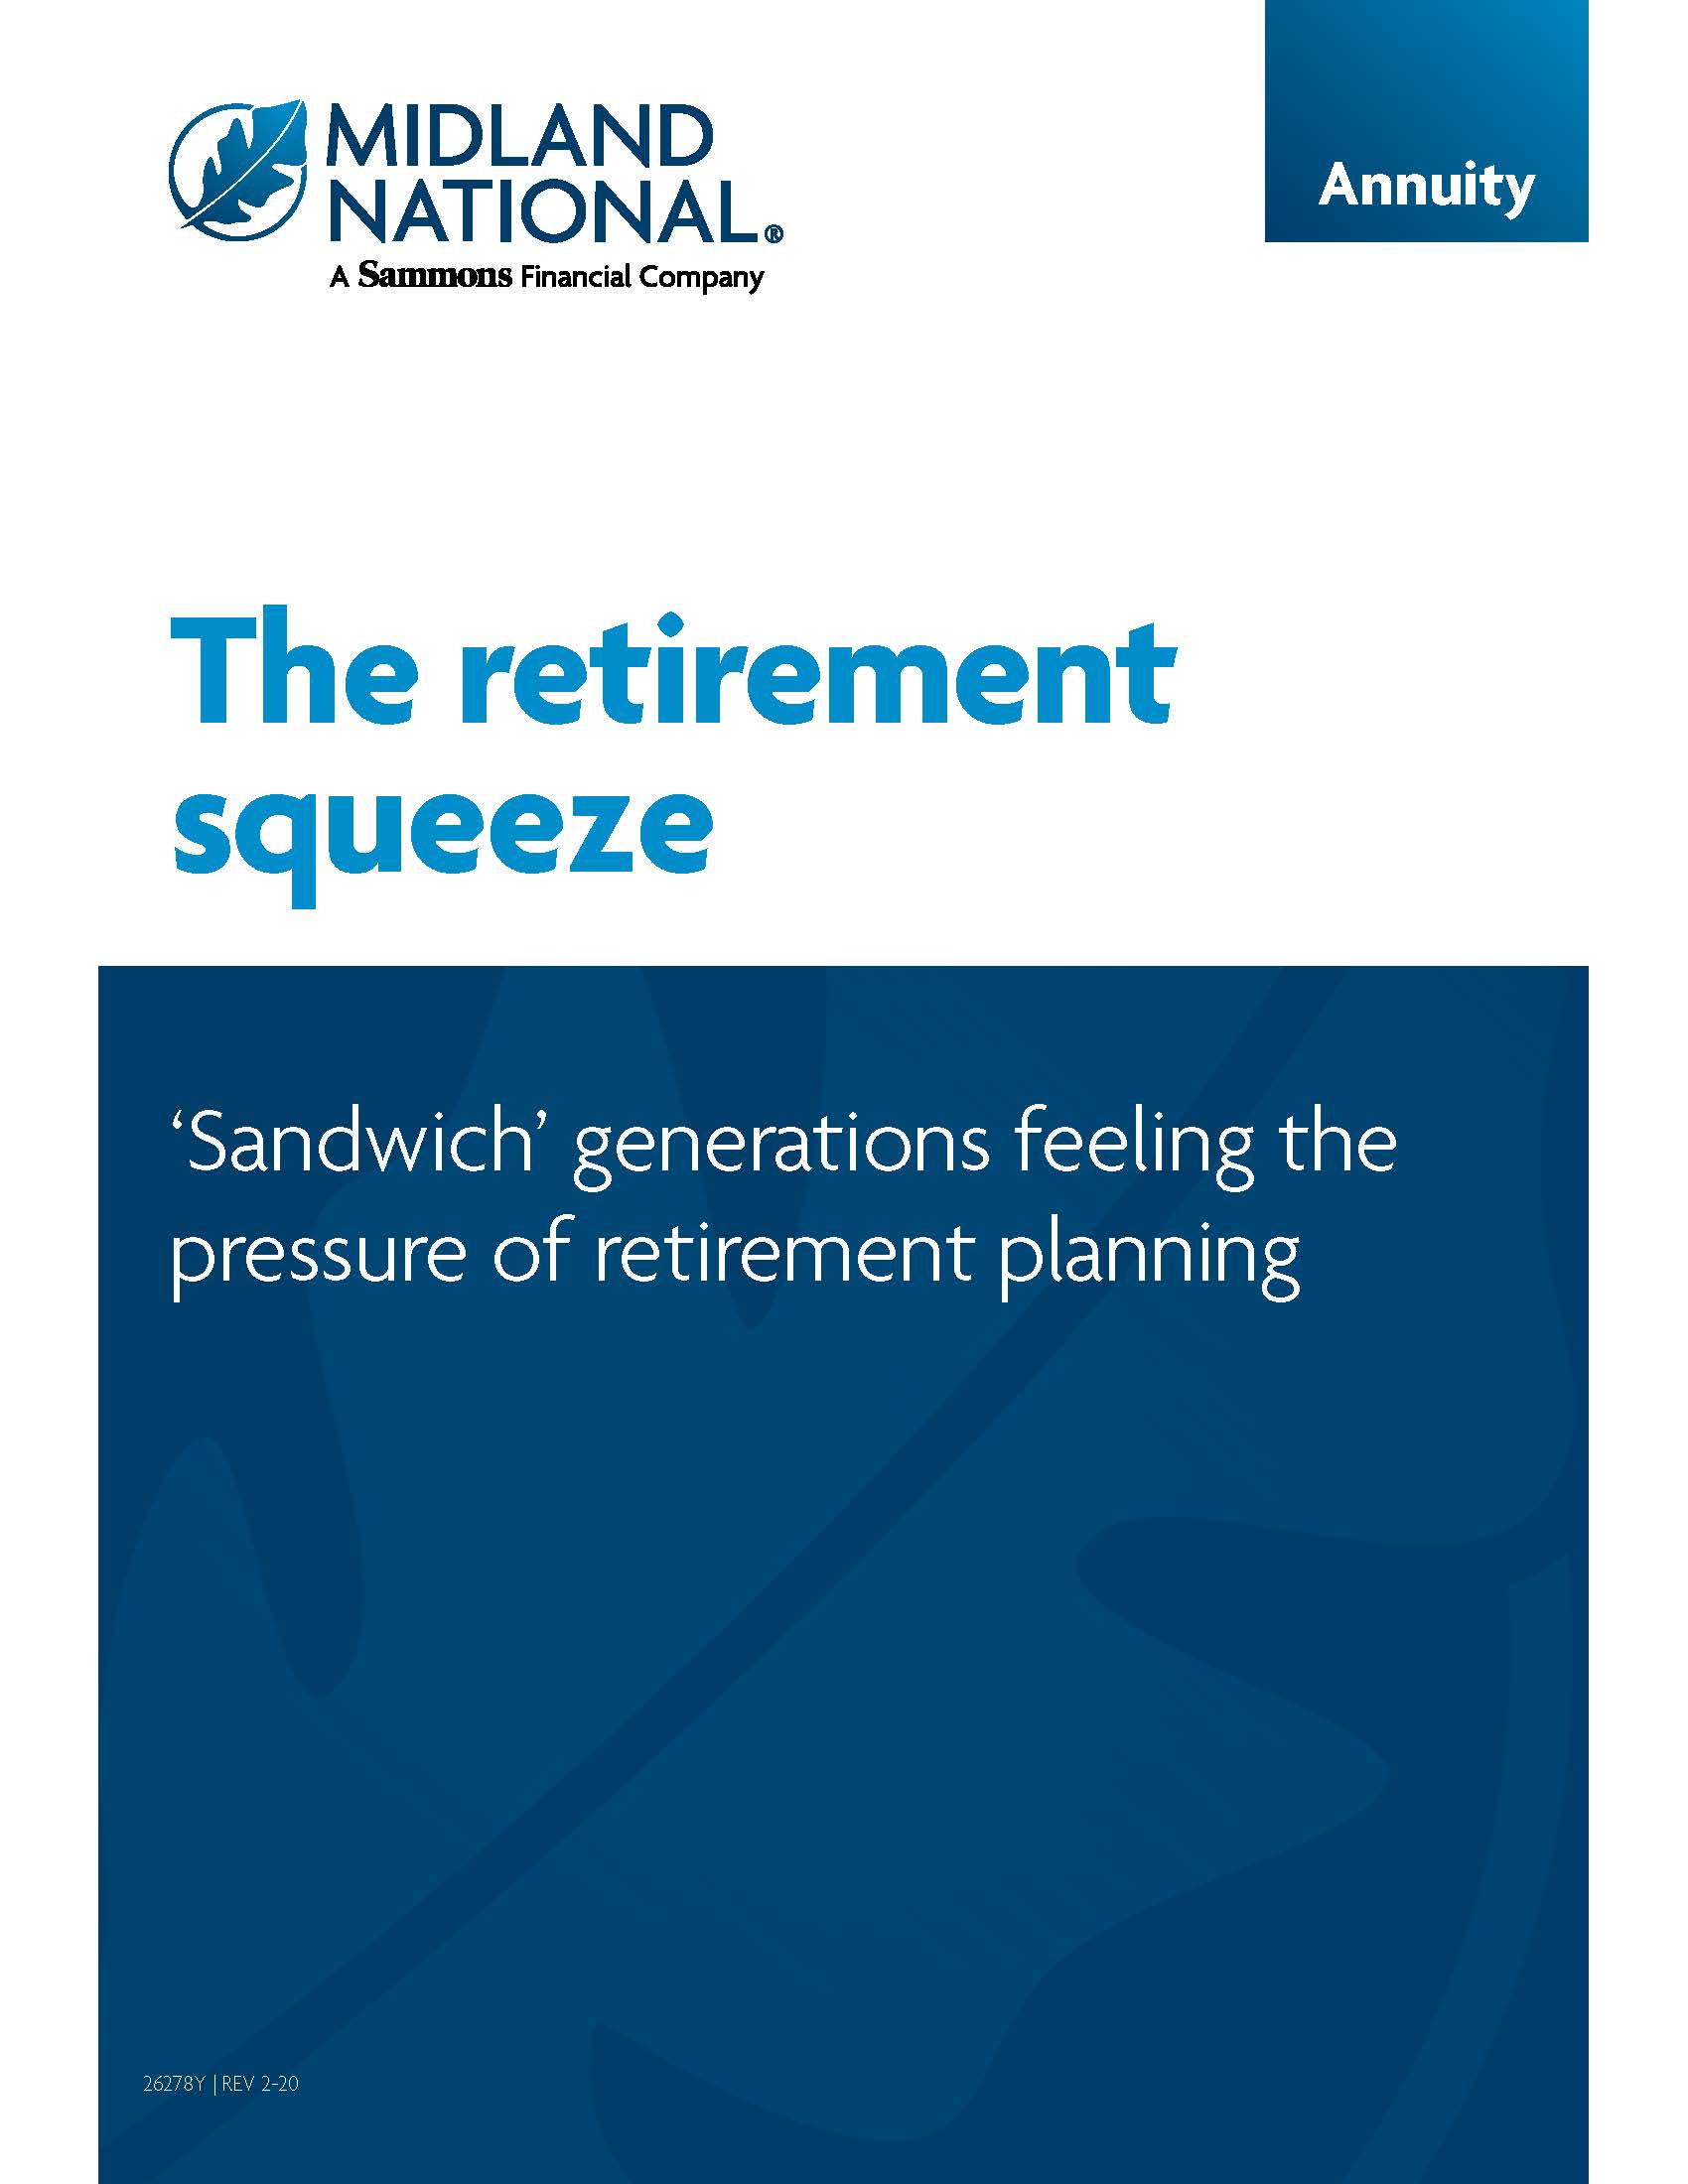 The Retirement Squeeze Whitepaper